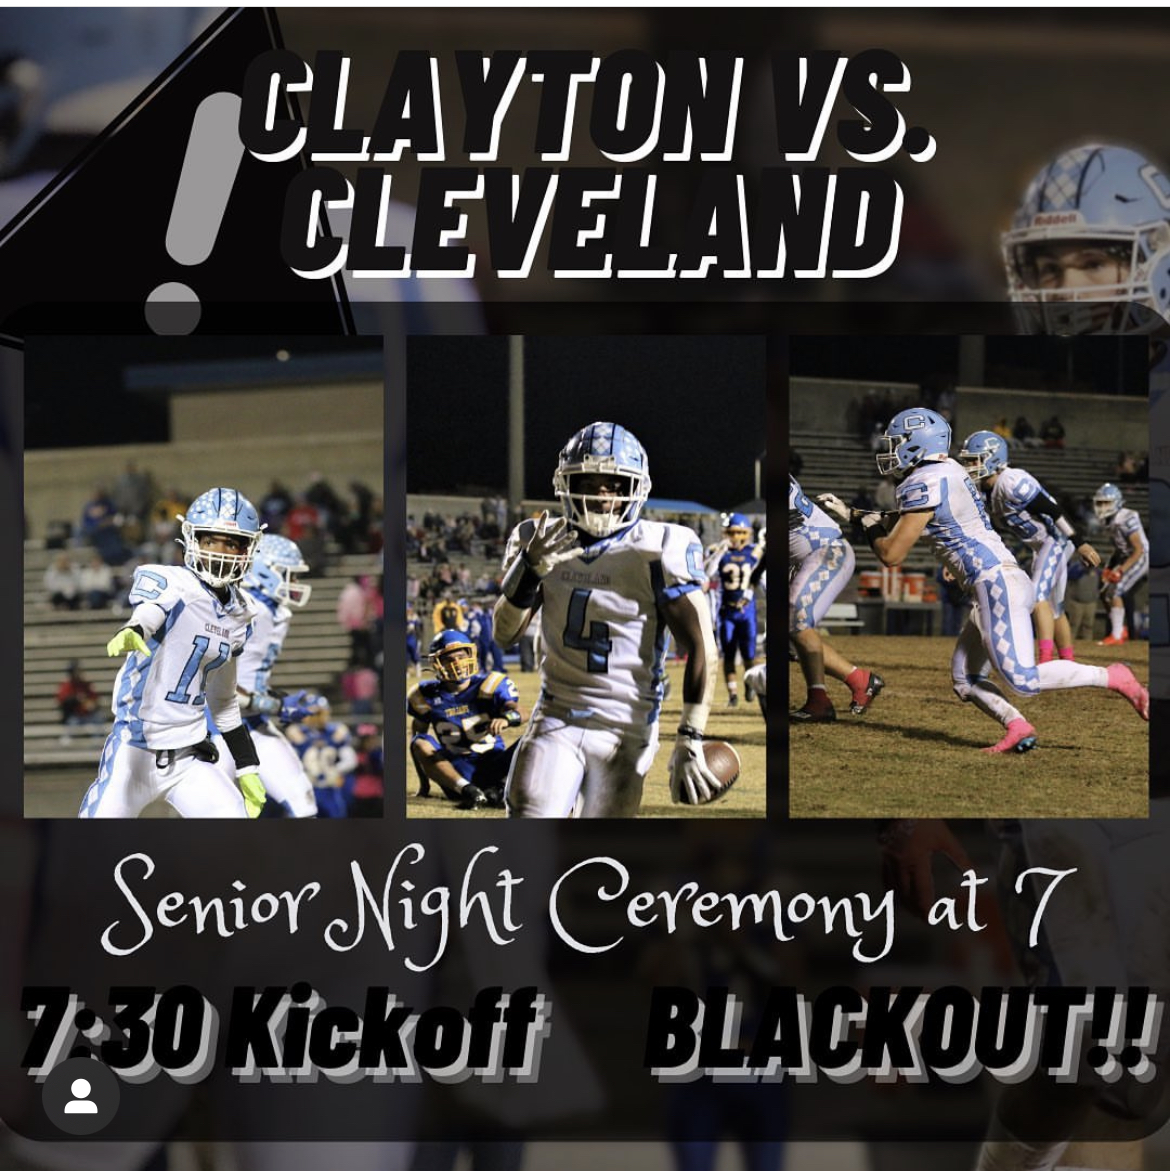 This is the Biggest Game of the year!!!! The biggest game in JOCO!!! Cleveland vs. Cross Town rival, Clayton. This is for the Conference Championship. And it's Senior Night!!! The weather looks great for some Friday Night Lights!!!! Kickoff is at 7:30.